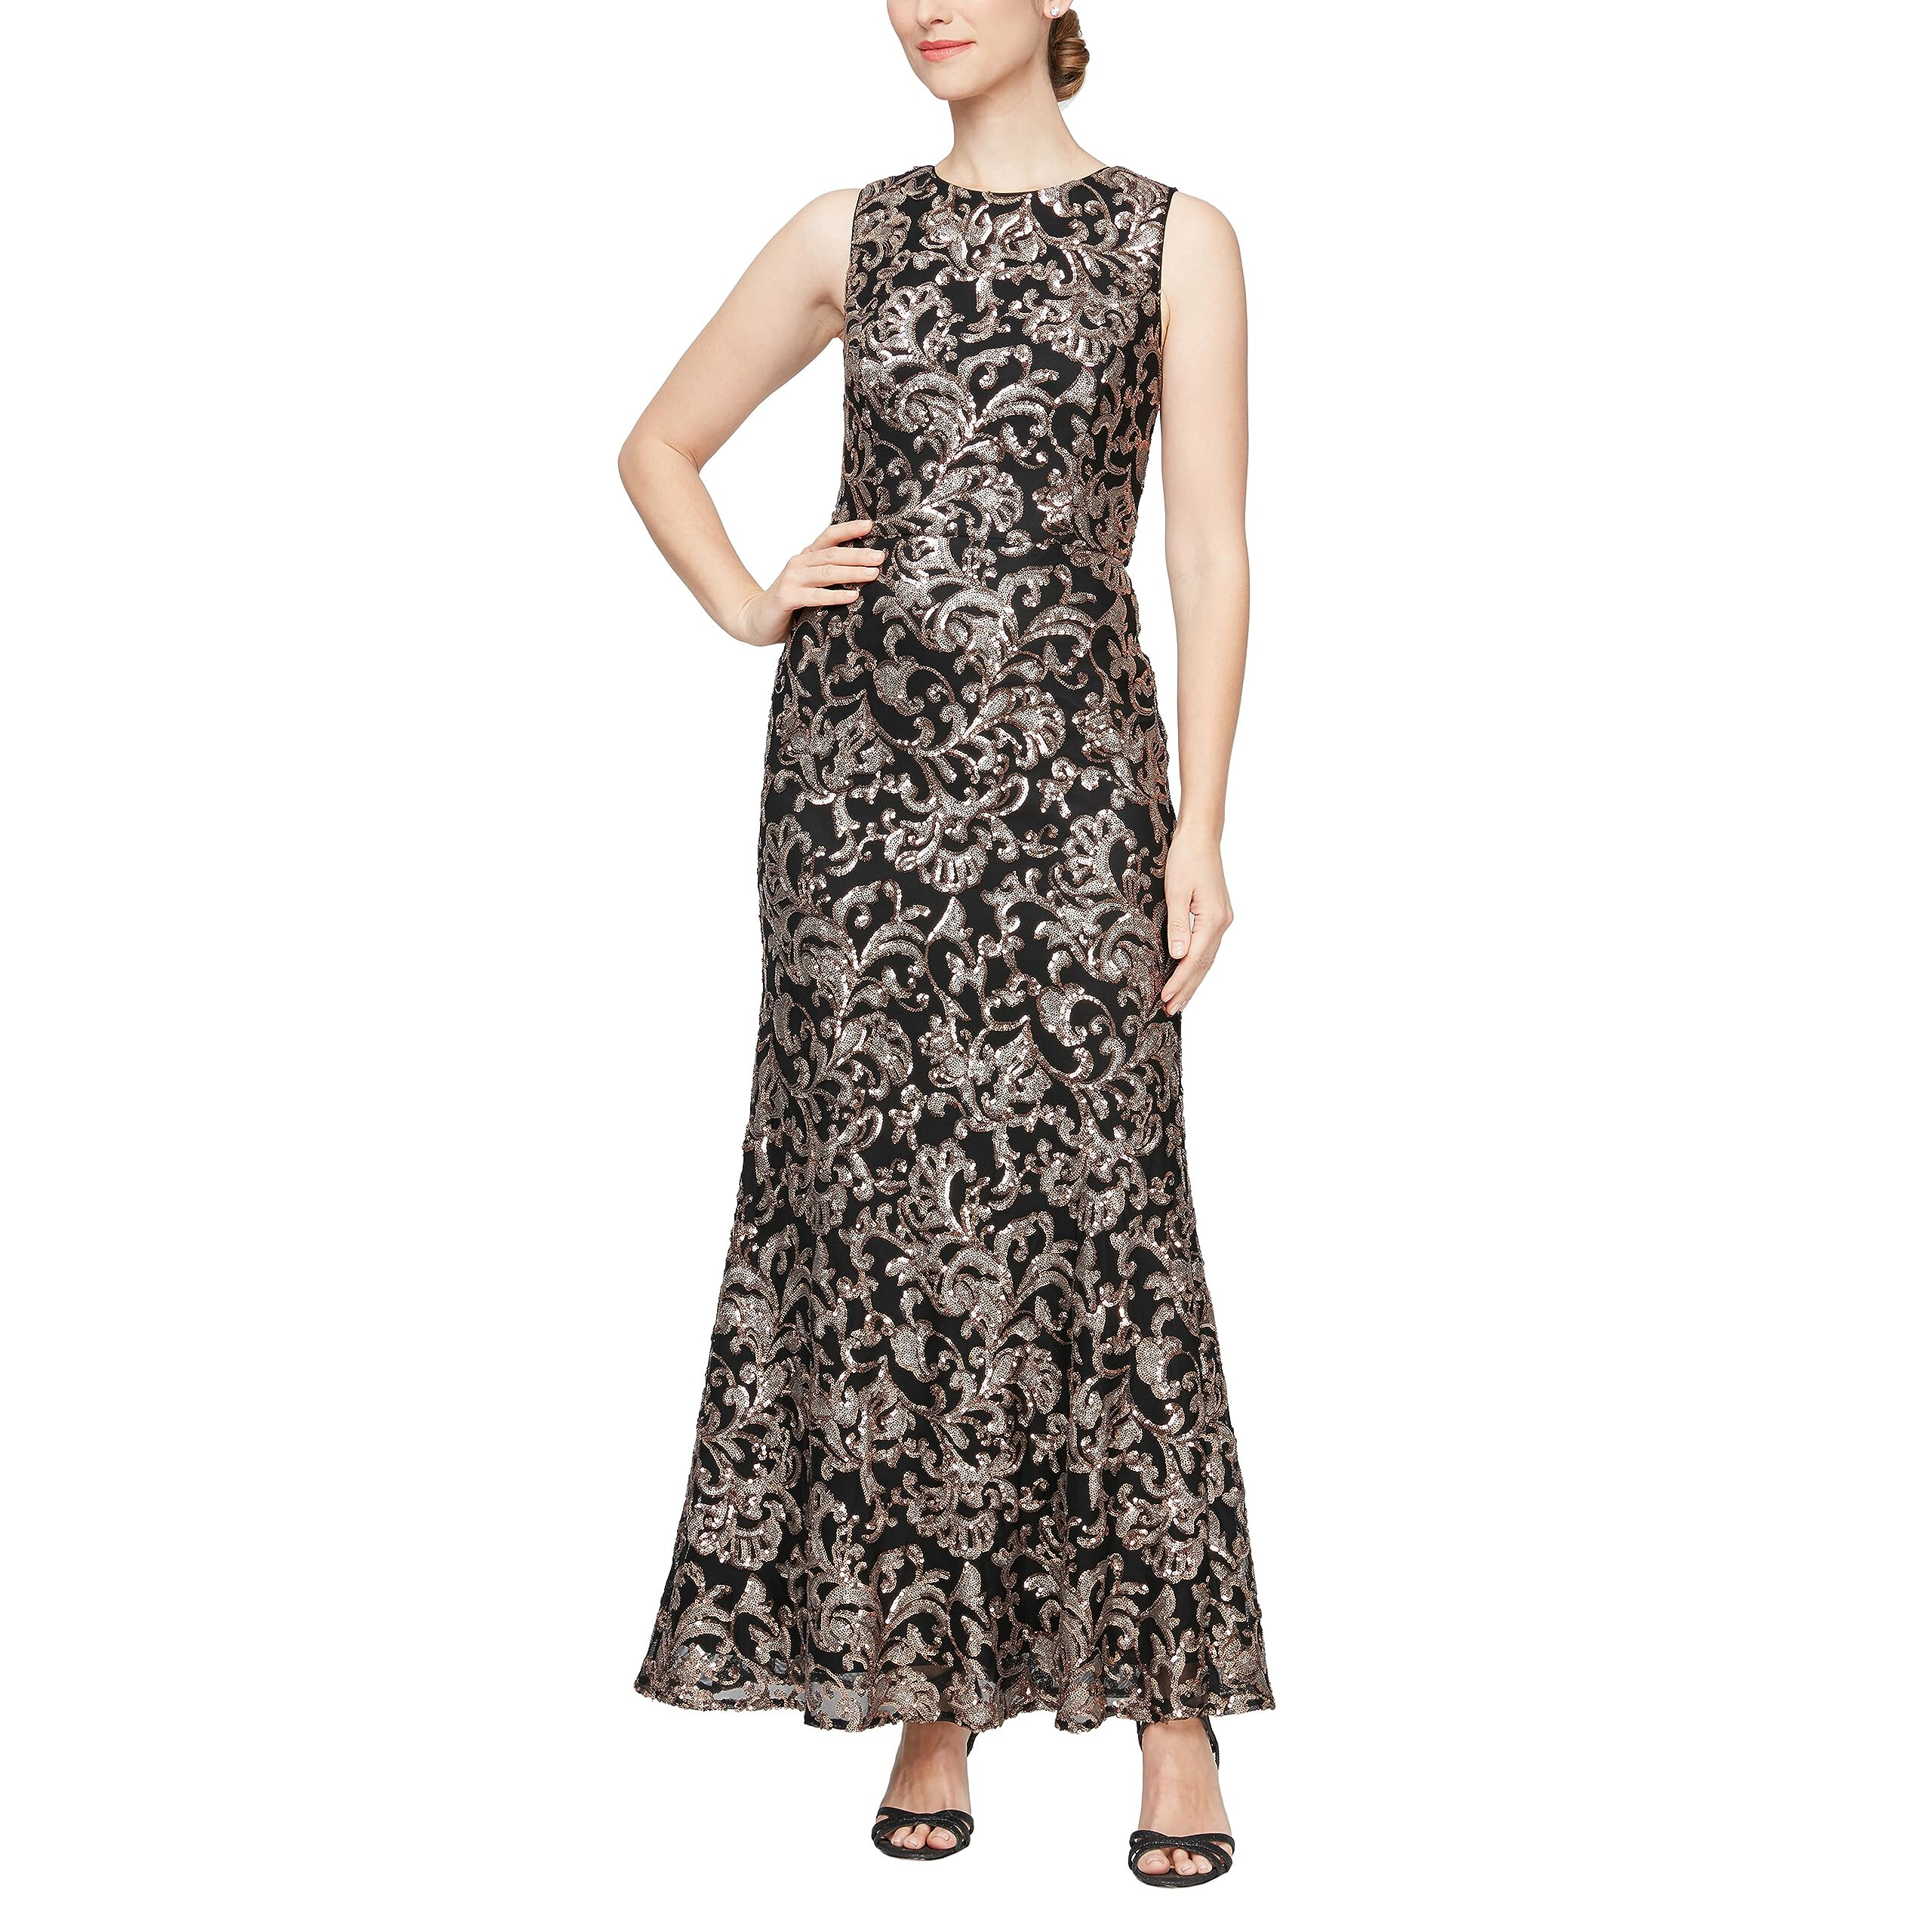 Imbracaminte Femei Alex Evenings Long Sequins Embroiderd Dress with Illusion Neckline and Fit and Flare Skirt BlackCopper